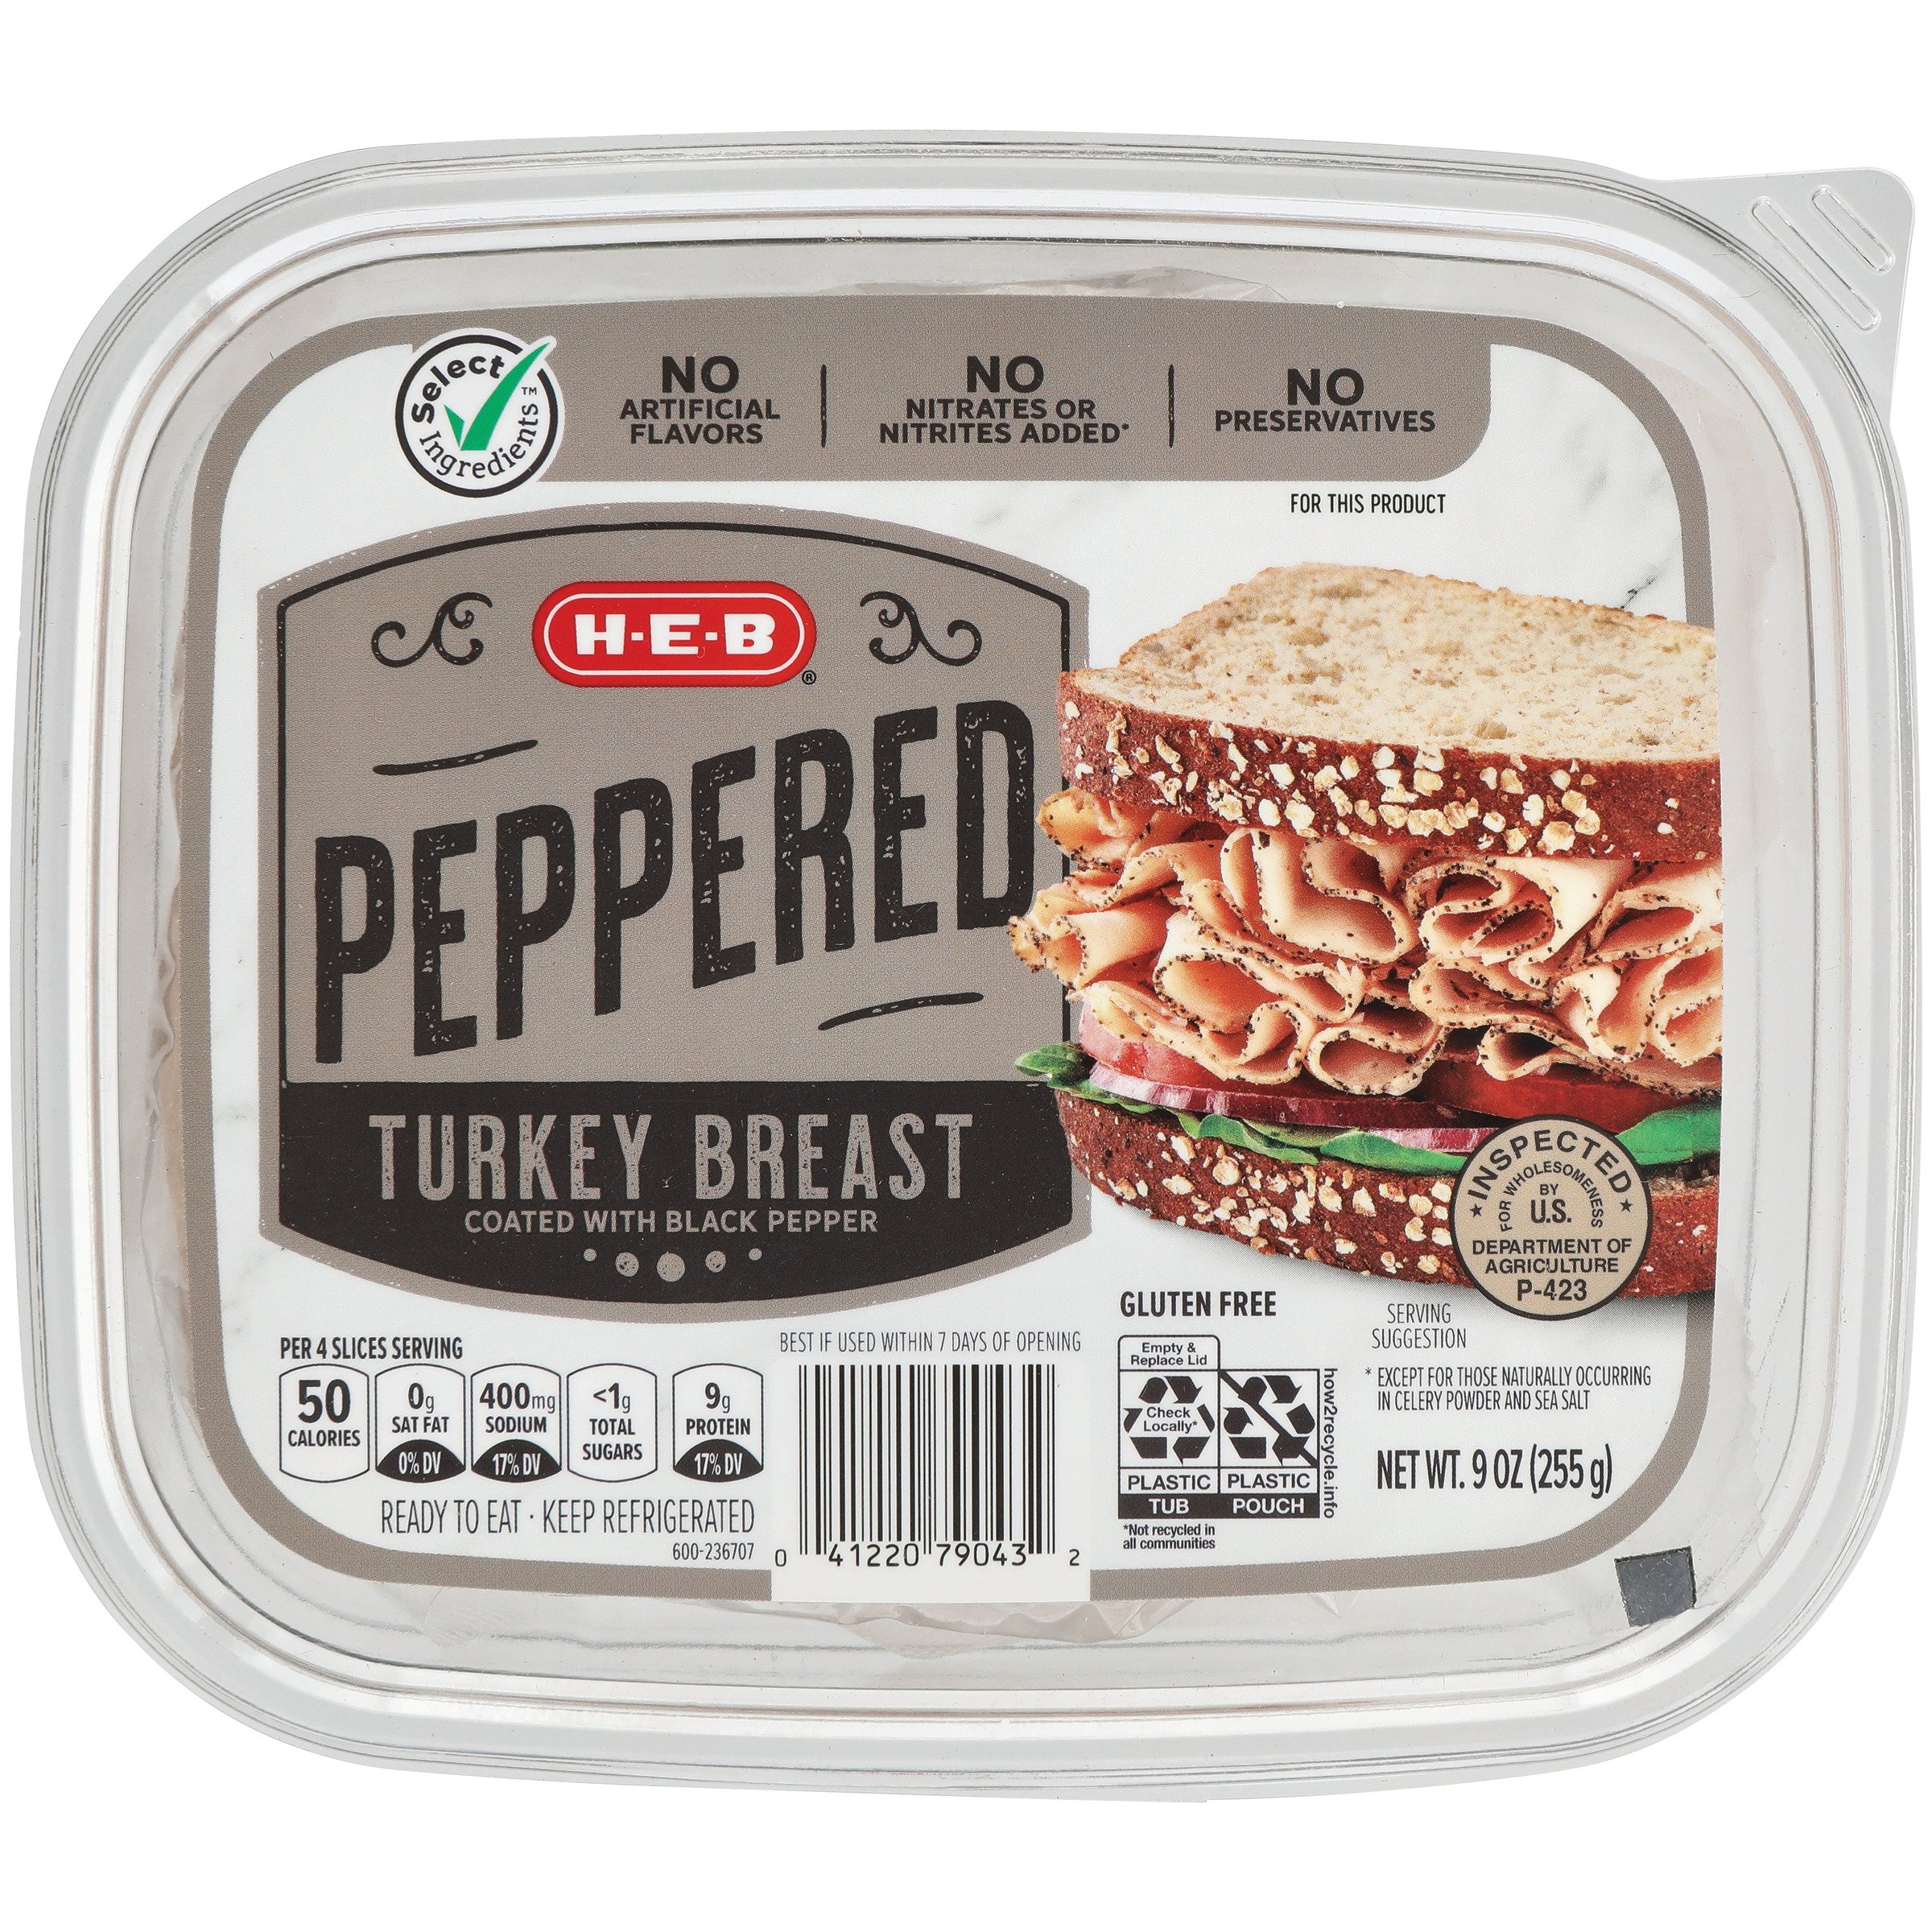 Turkey Breast Peppered Ch at Whole Foods Market